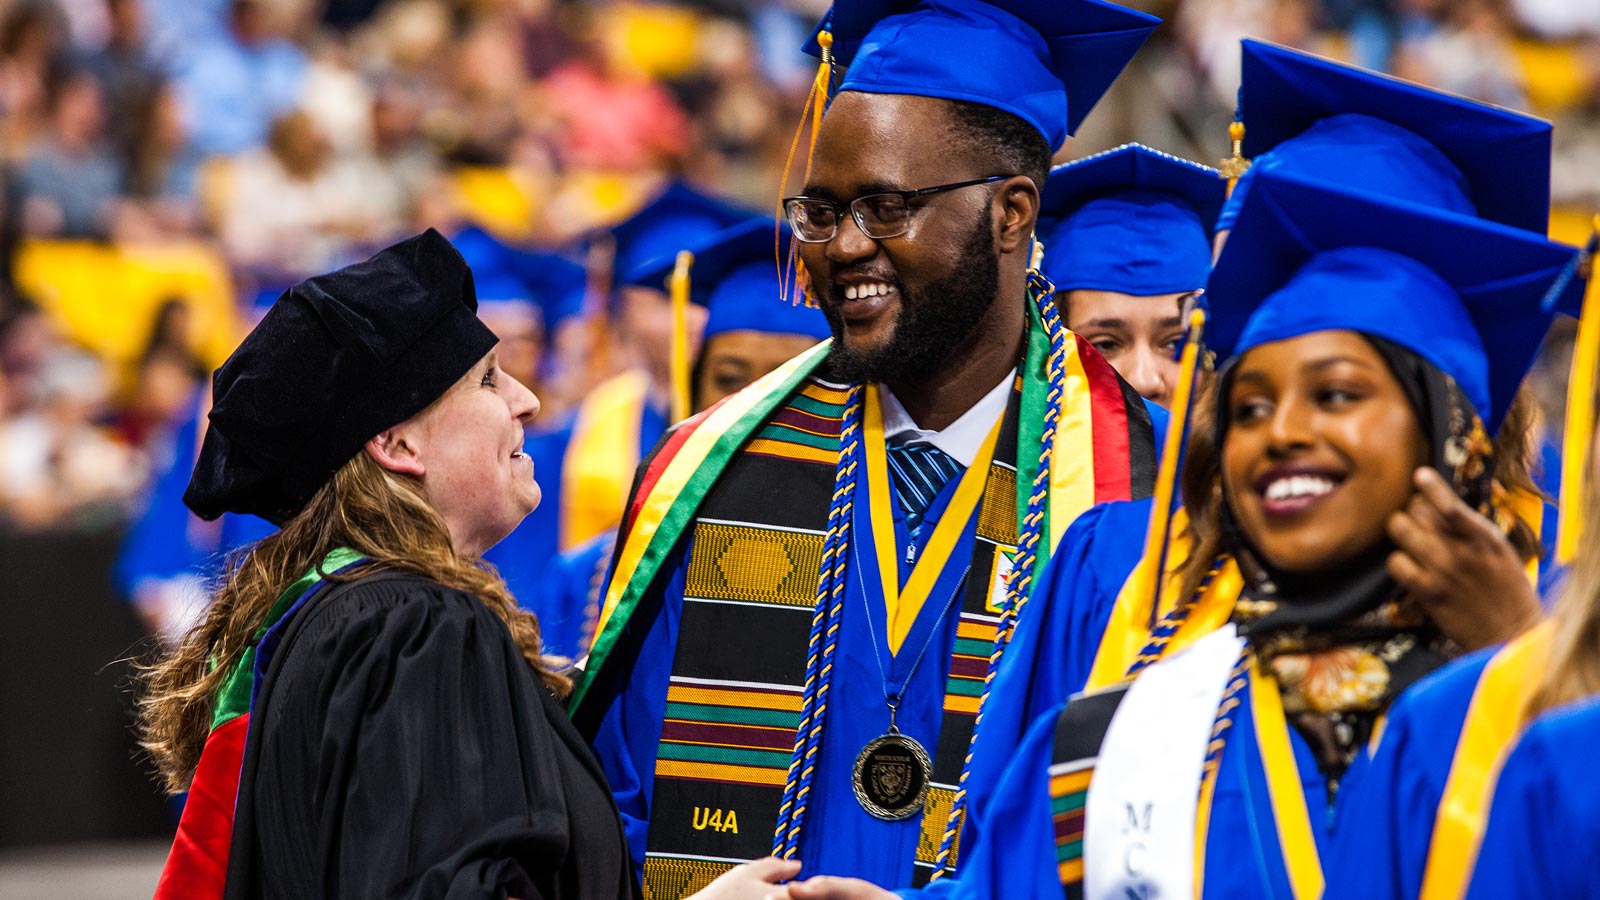 Student greeted by a faculty member at Commencement